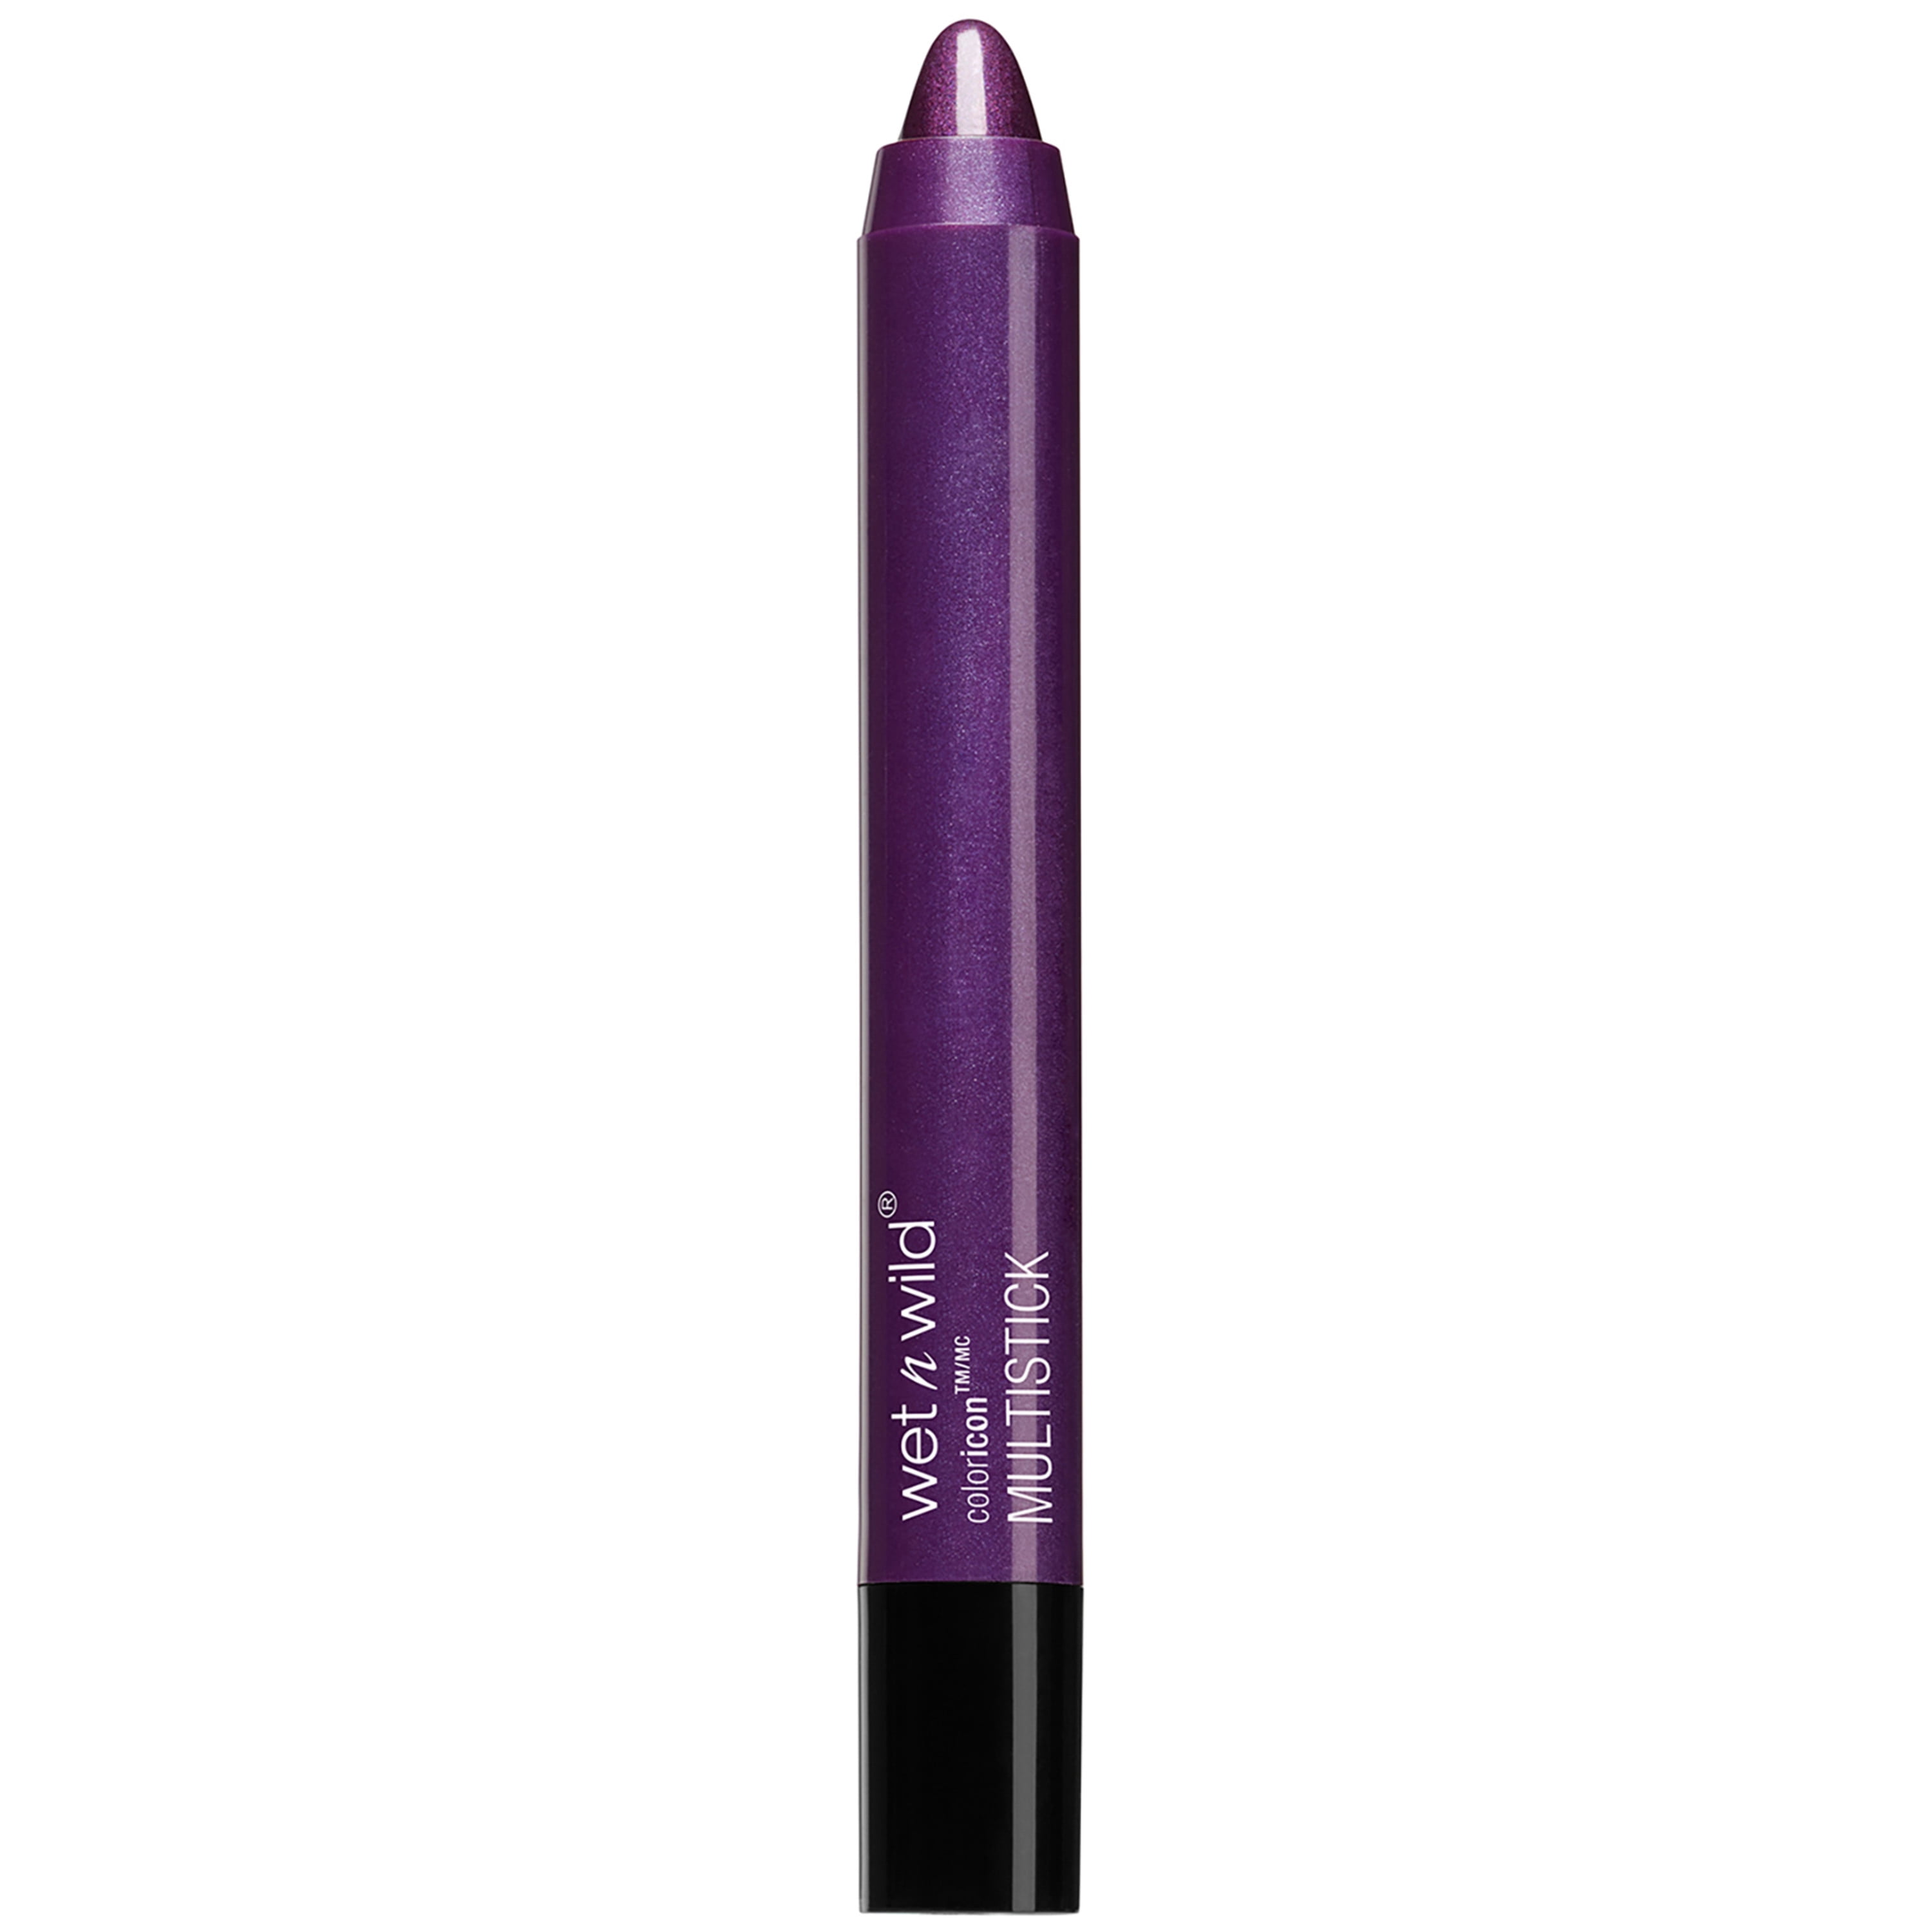 wet n wild Color Icon Multi-stick, Royal Scam